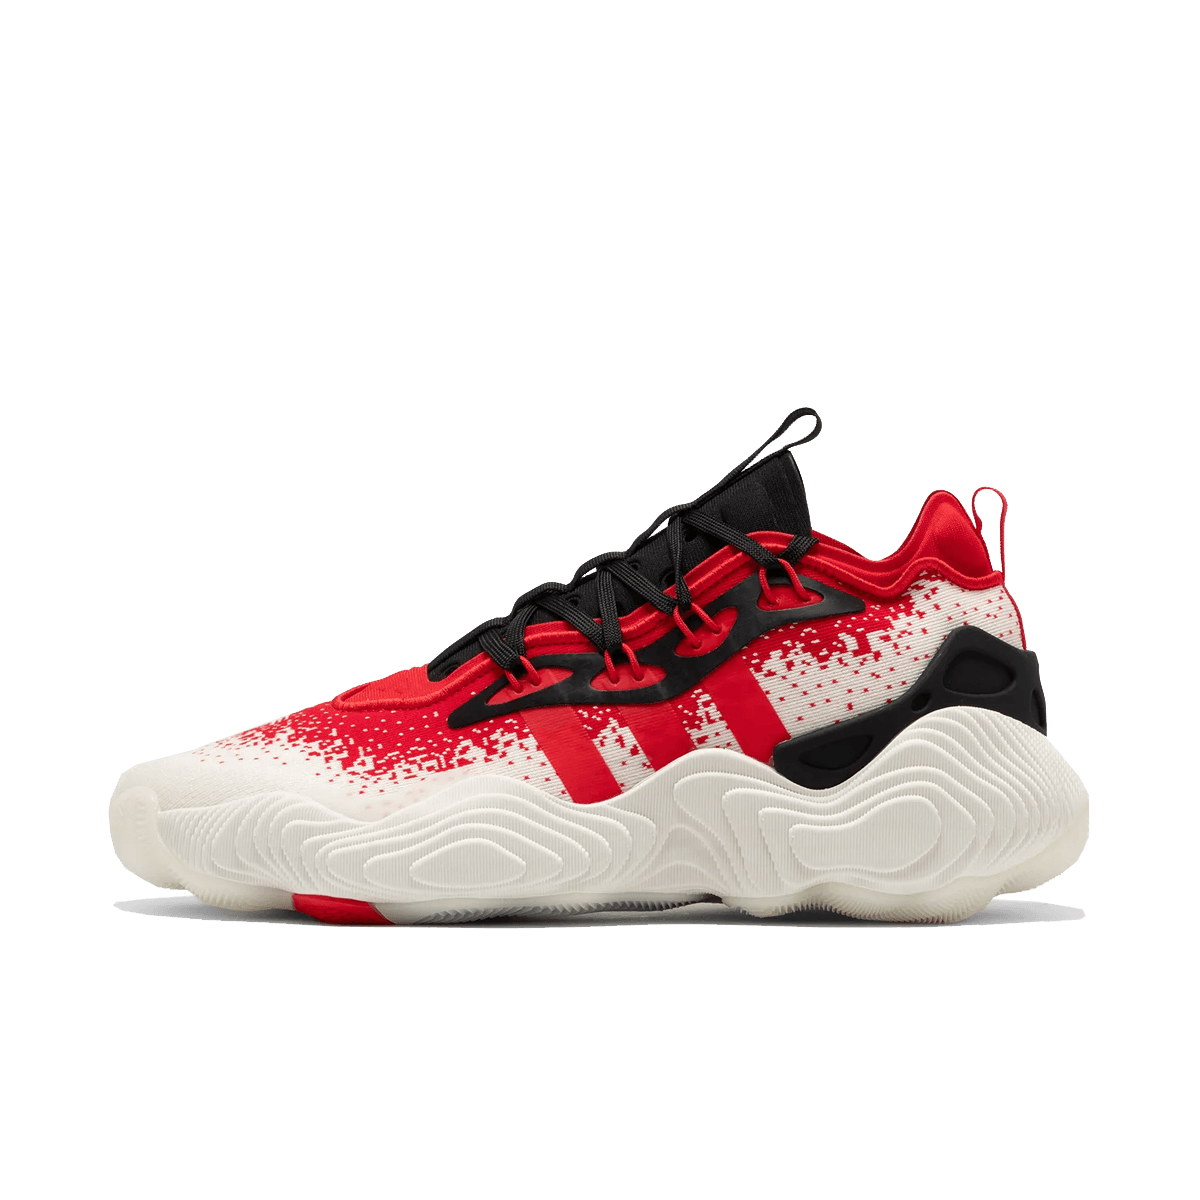 adidas Trae Young 3 'Vivid Red' IE2704